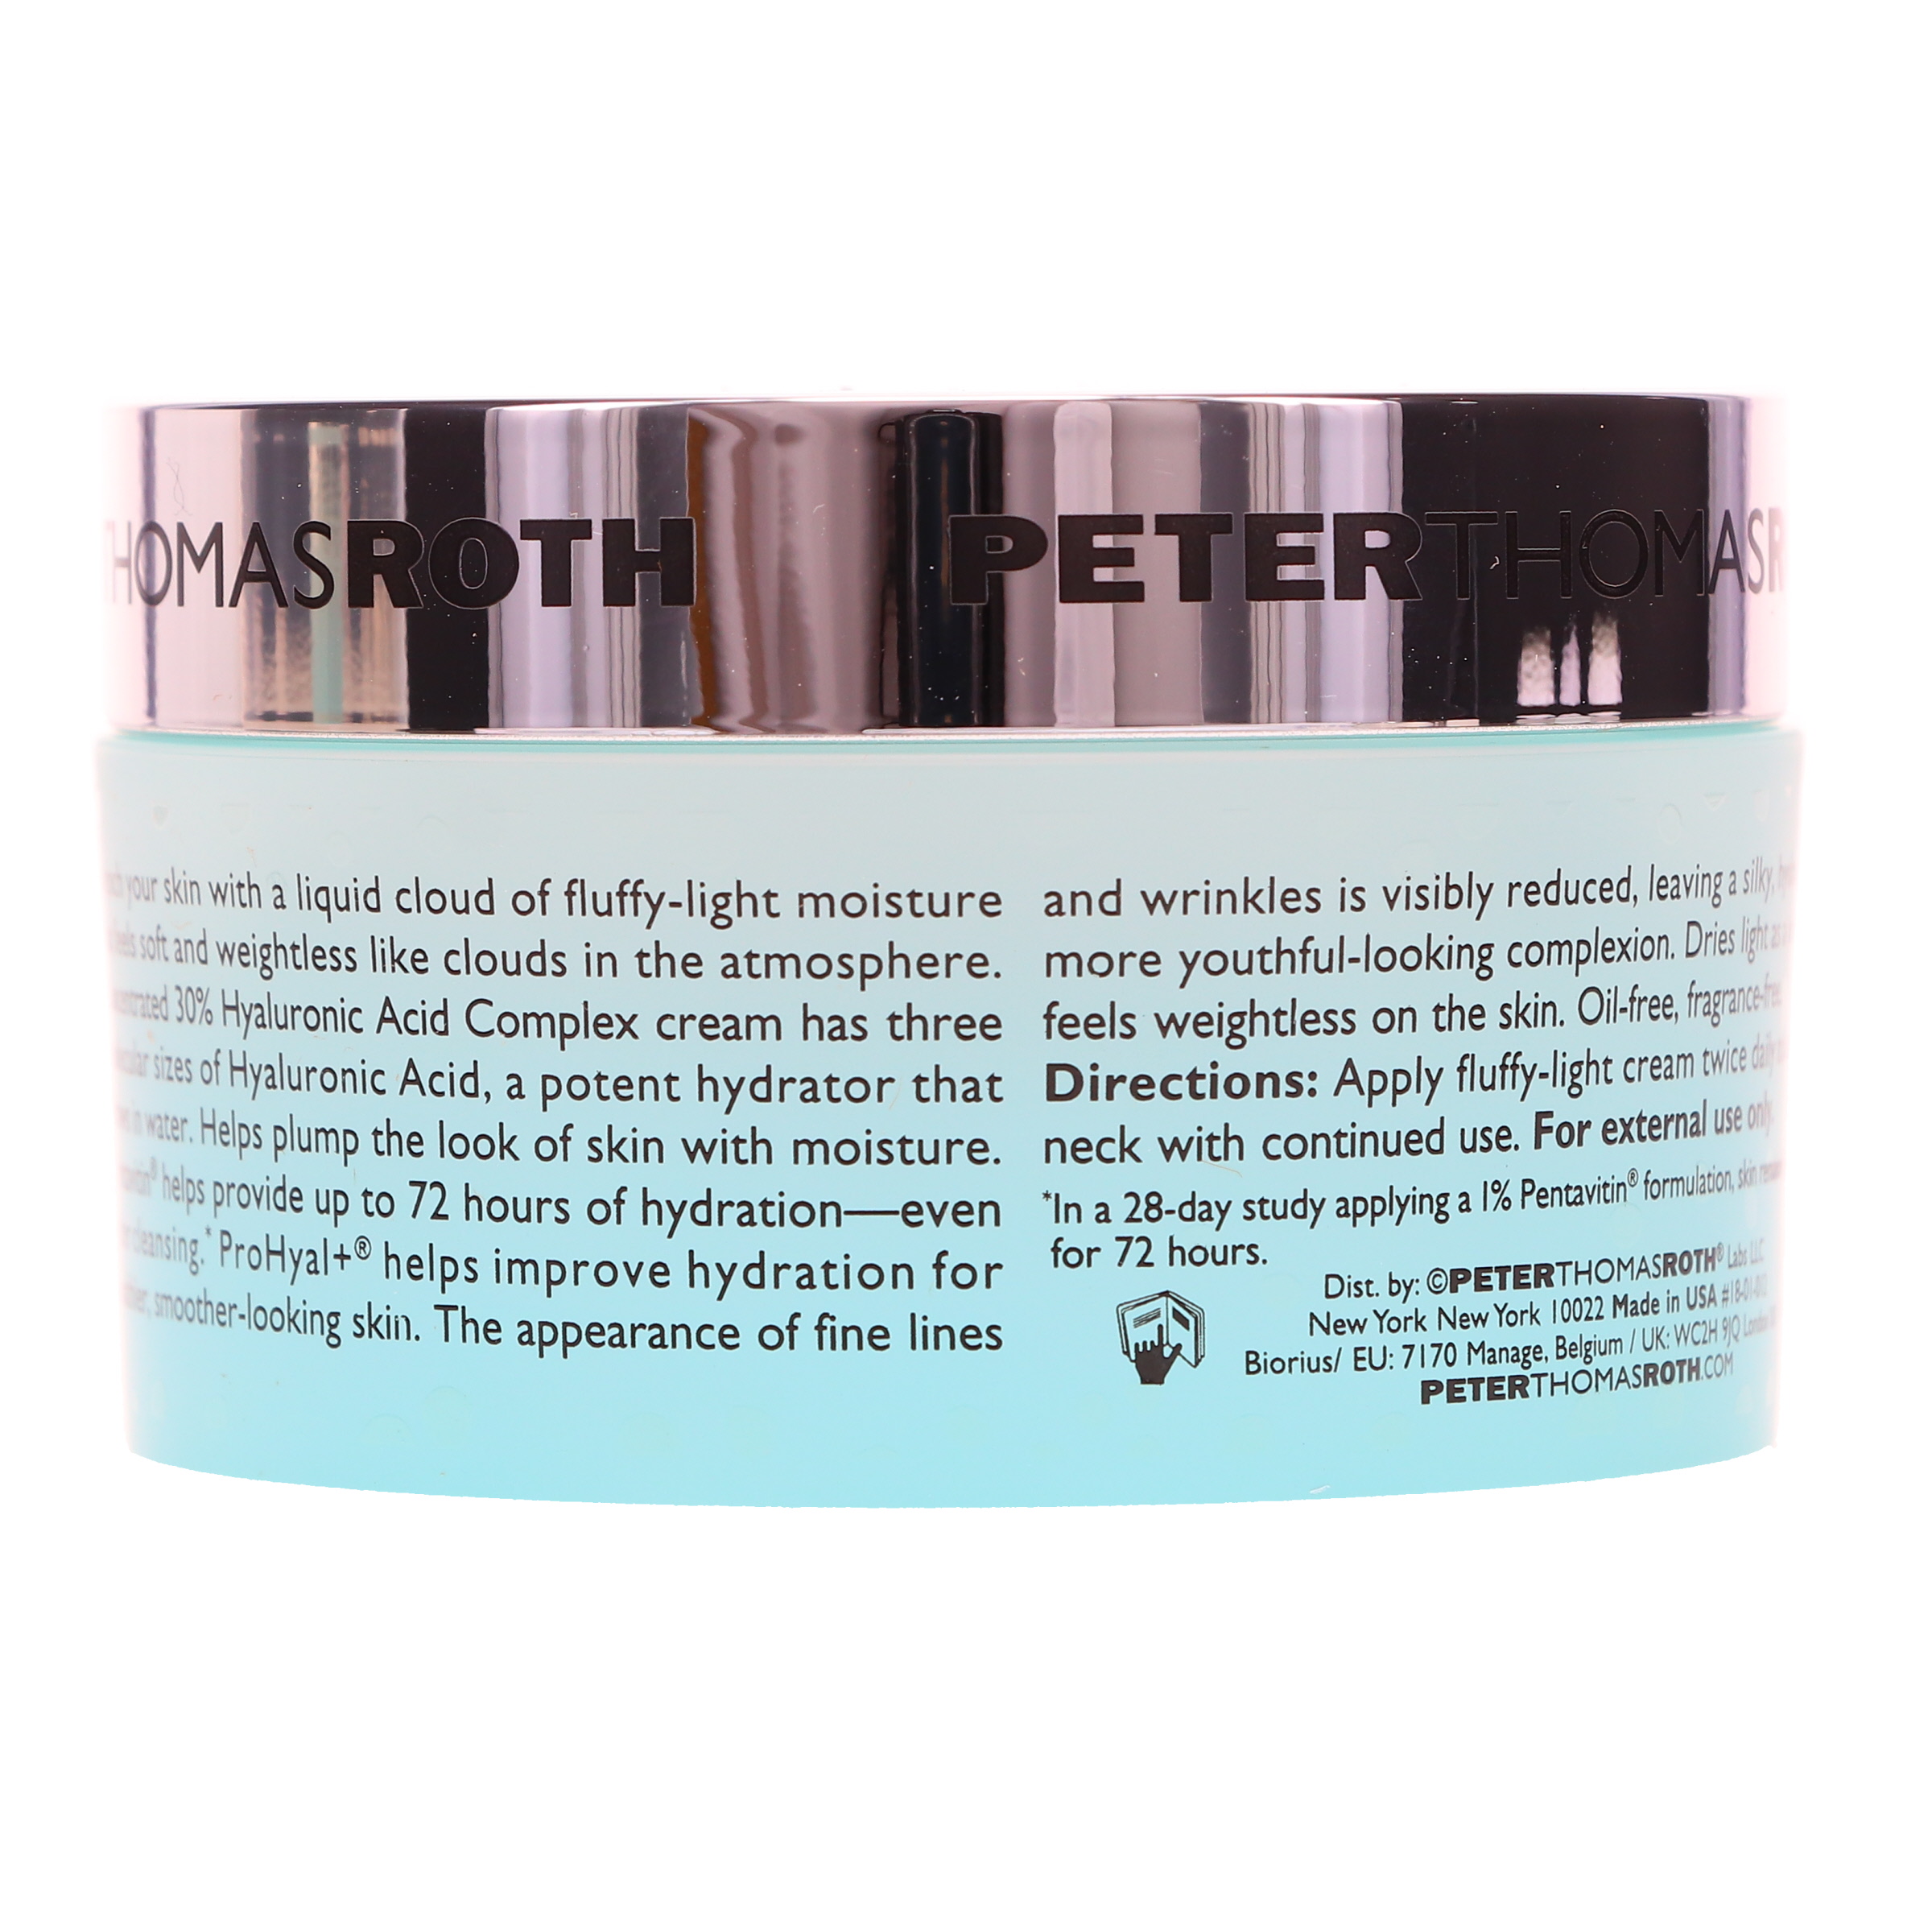 Peter Thomas Roth Water Drench Hyaluronic Cloud Cream 1.7 Hydrating Moisturizer for Unisex - image 4 of 8